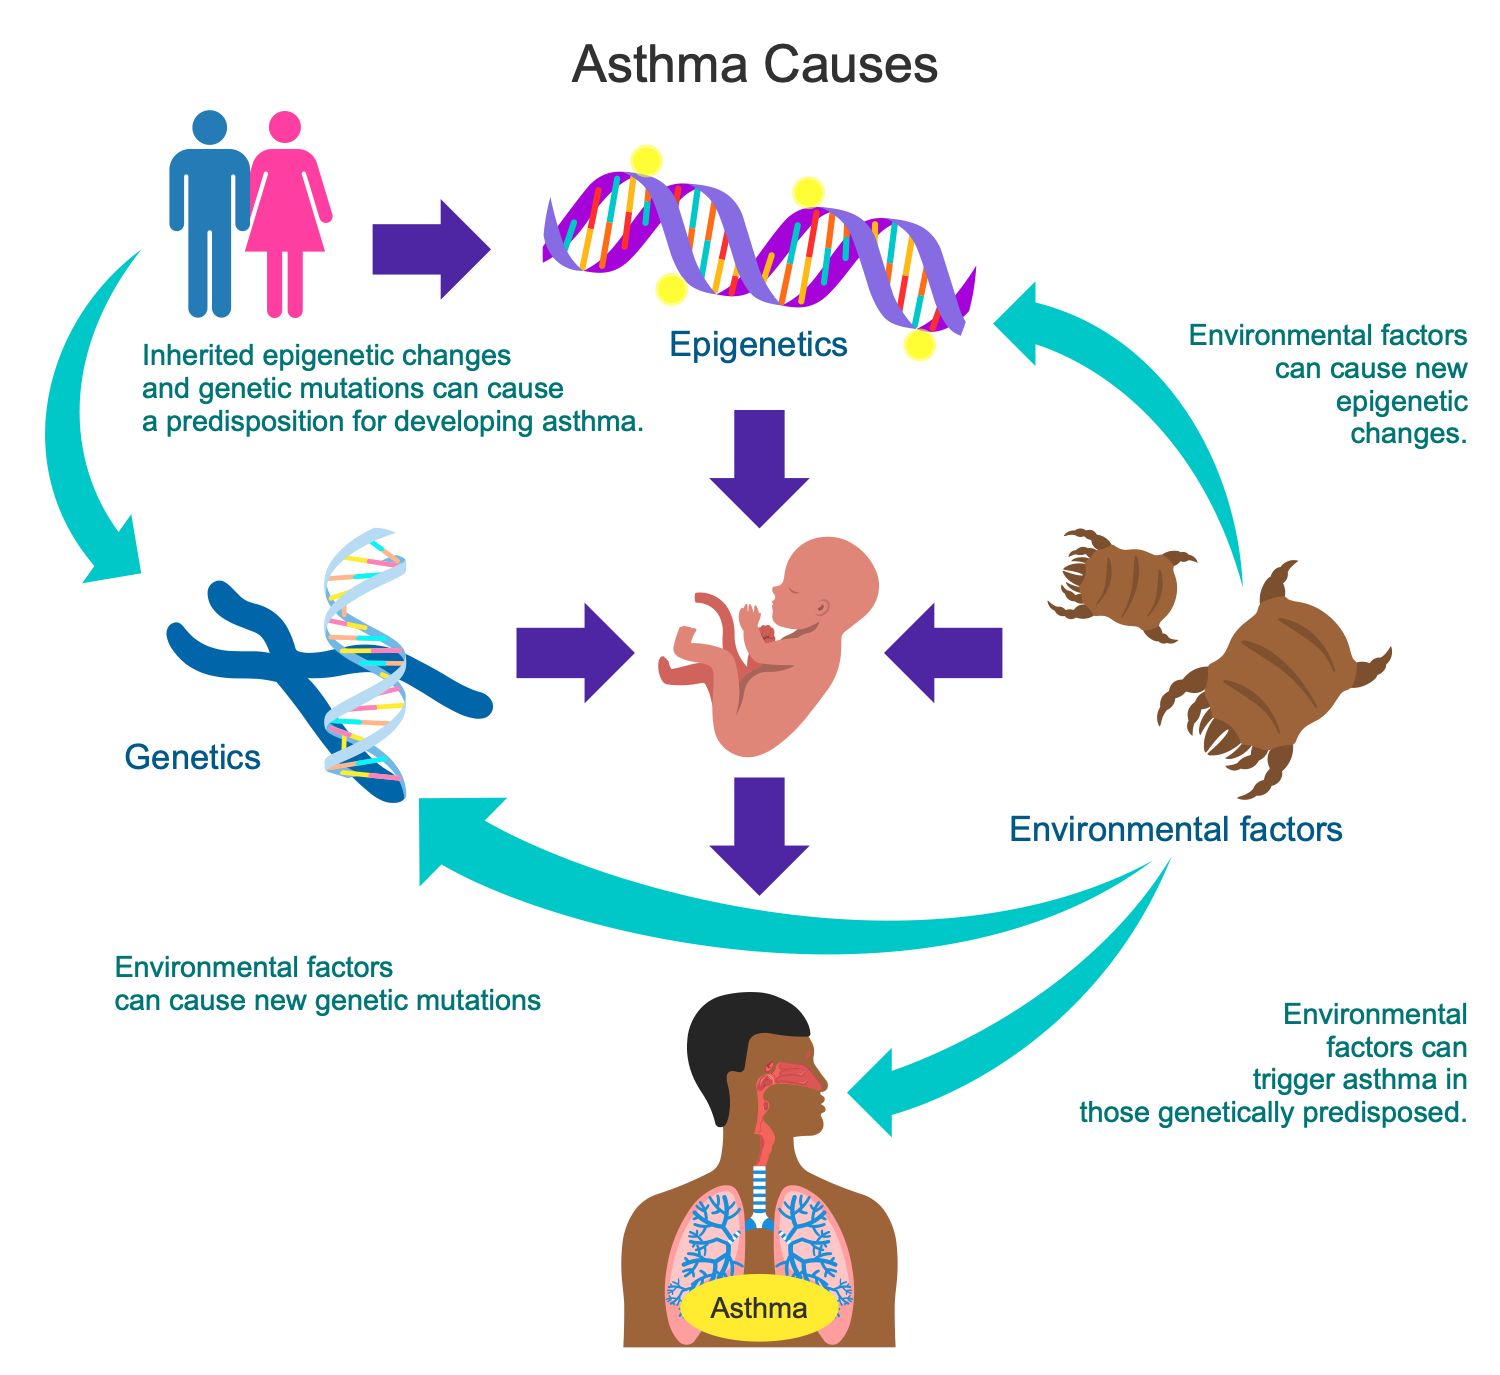 Asthma Causes